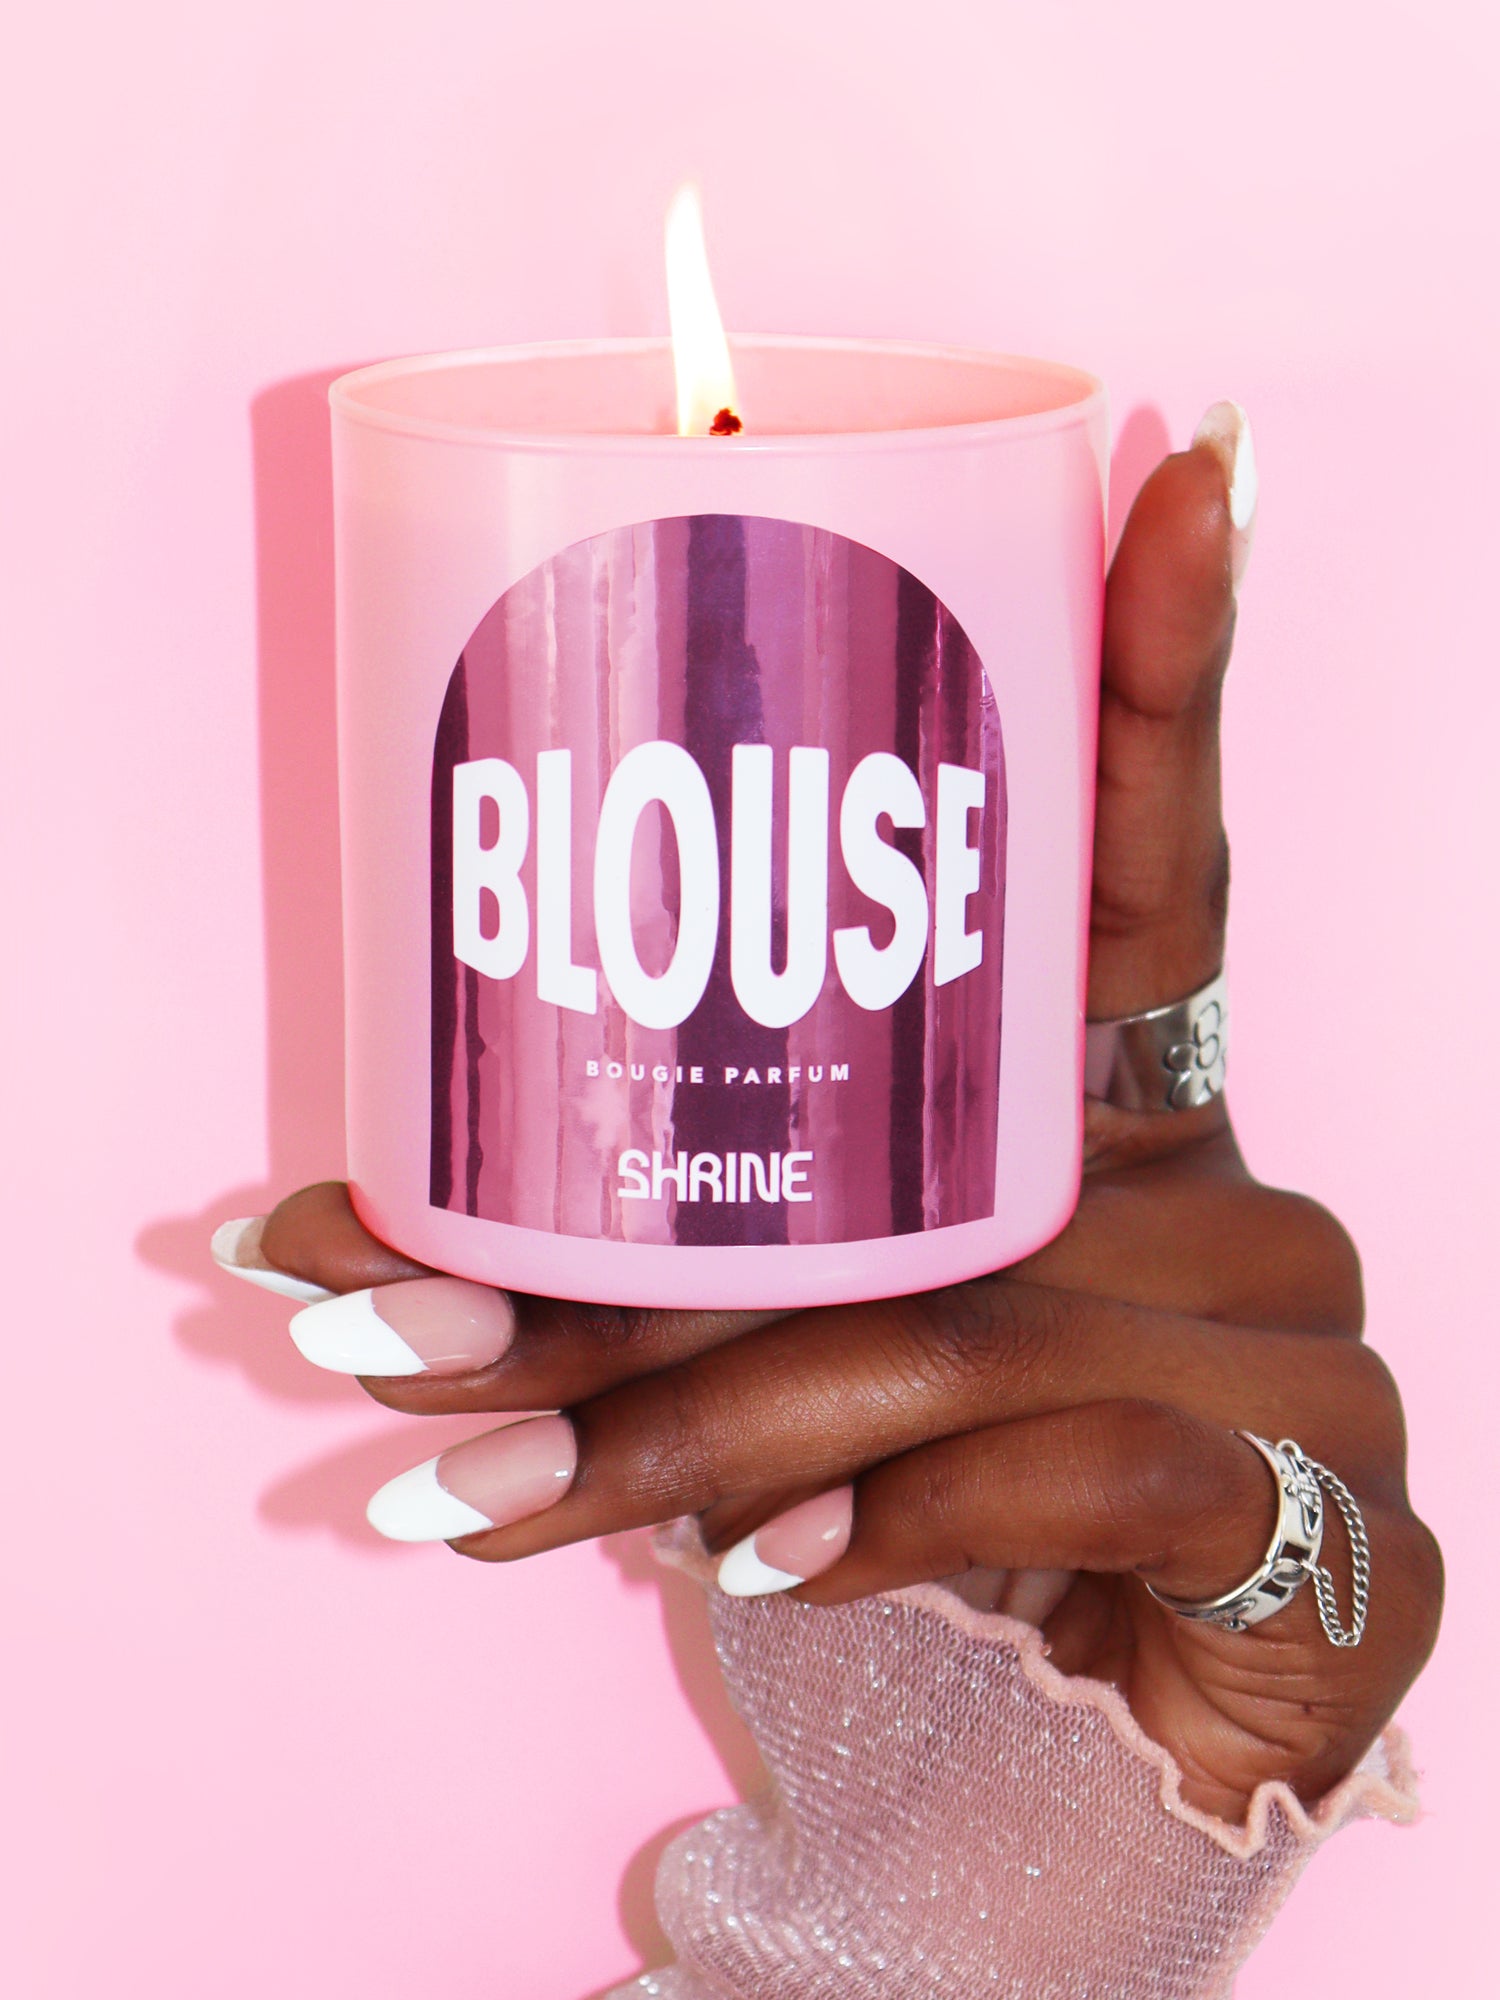 shrine blouse pale pink light pink scented candle with metallic pink label floral candle magazine candle musk candle pink peppercorn candle satin candle shop shrine shopshrine